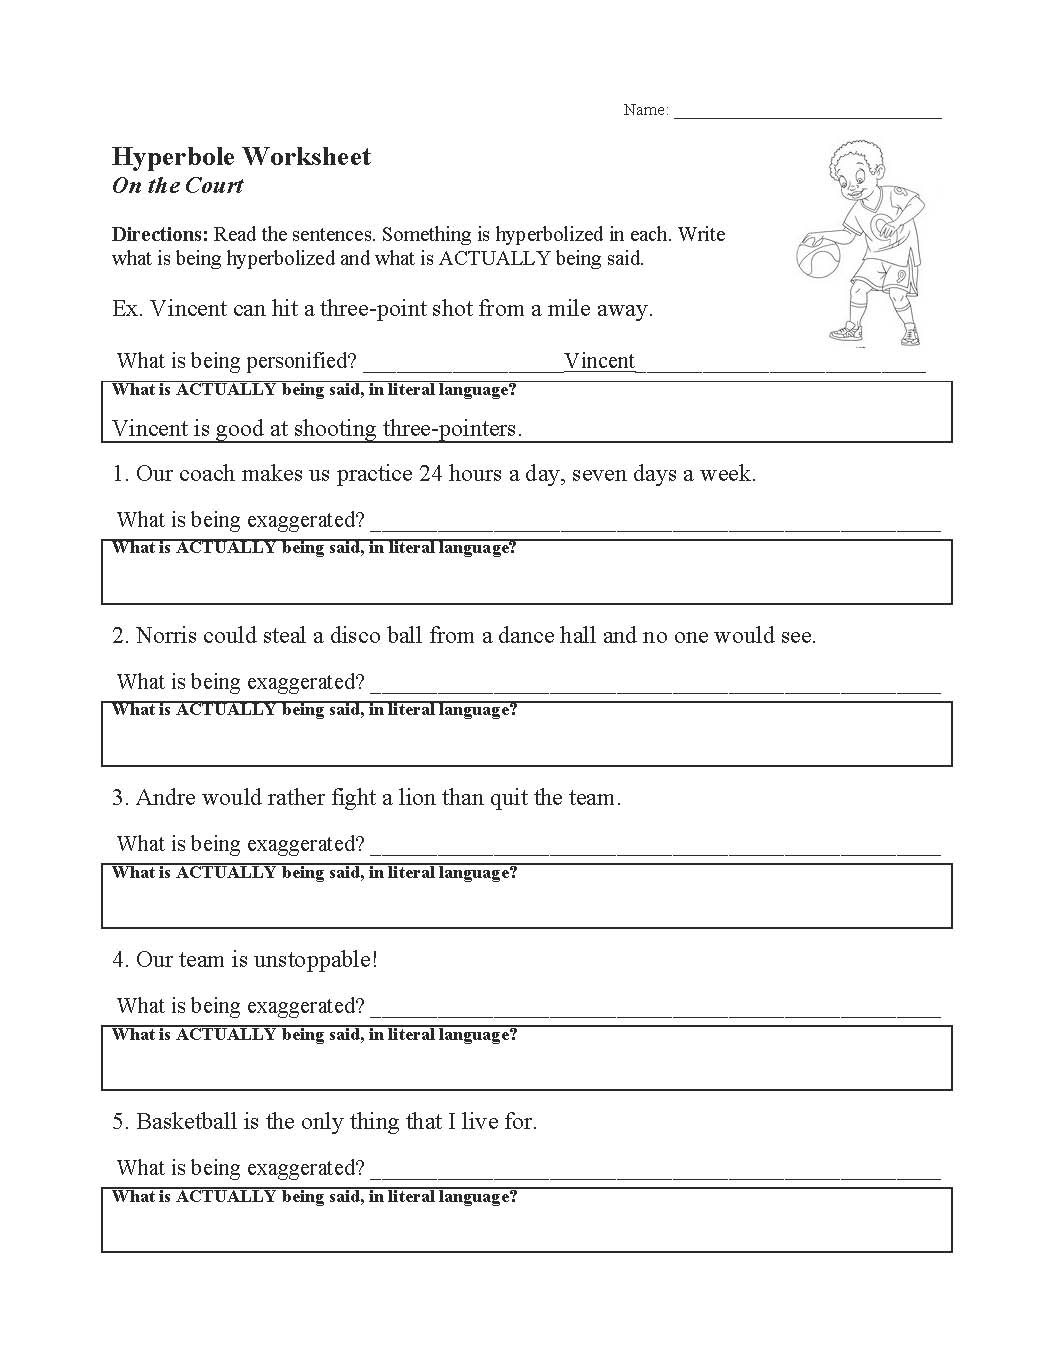 This is a preview image of our Hyperbole Worksheet. Click on it to enlarge or view the source file.